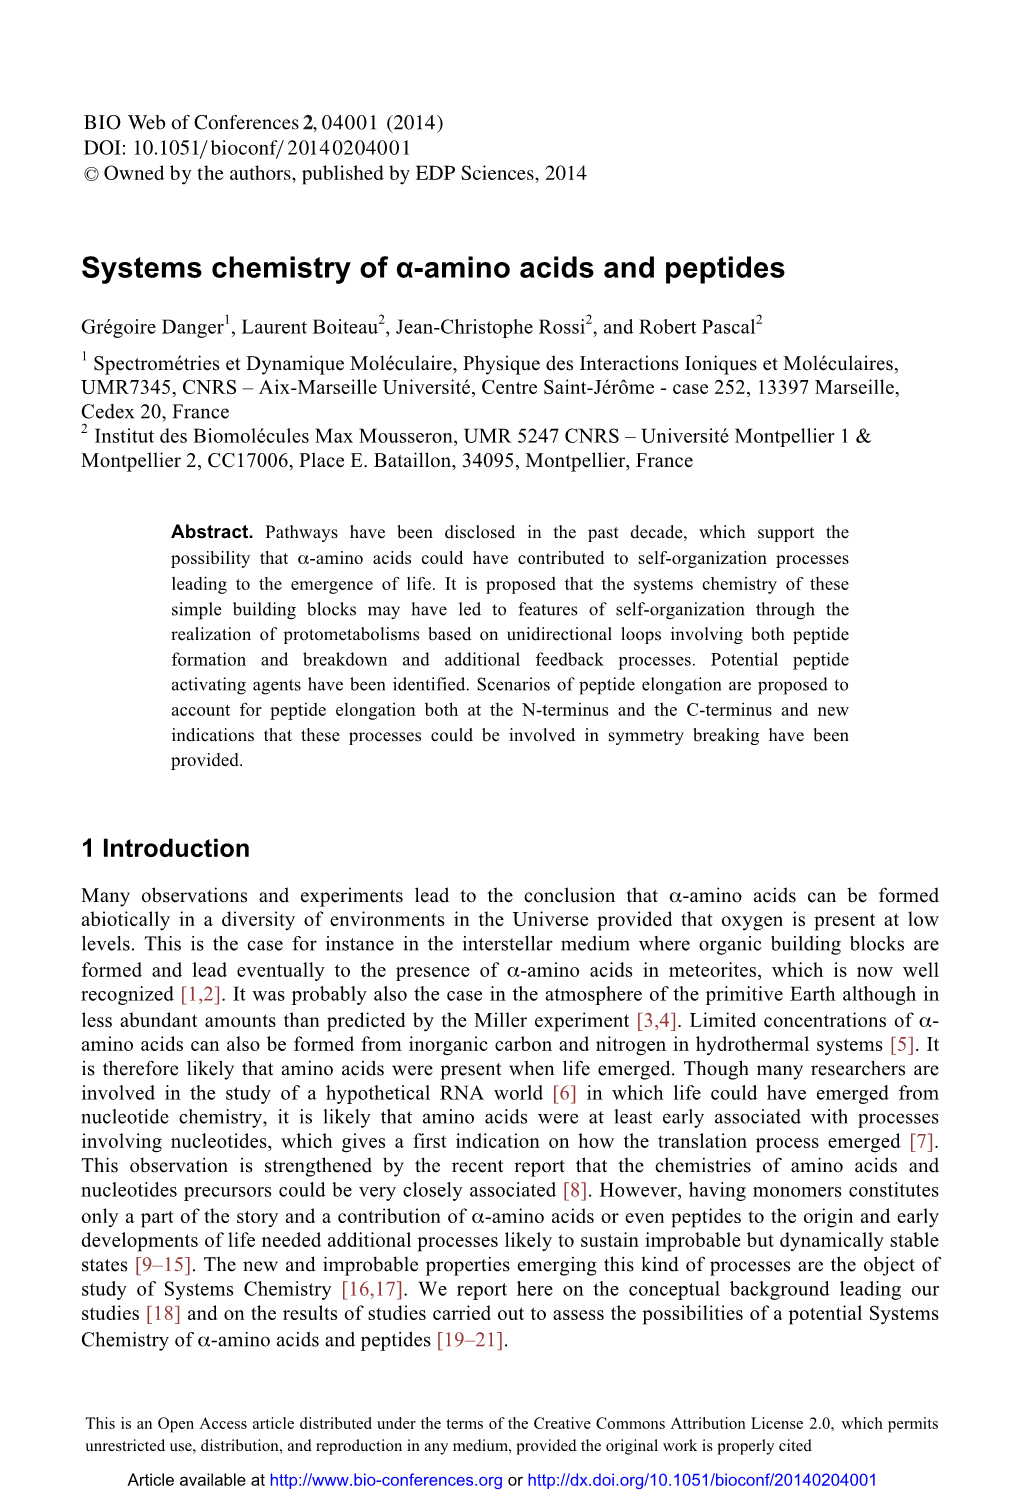 Systems Chemistry of Α-Amino Acids and Peptides